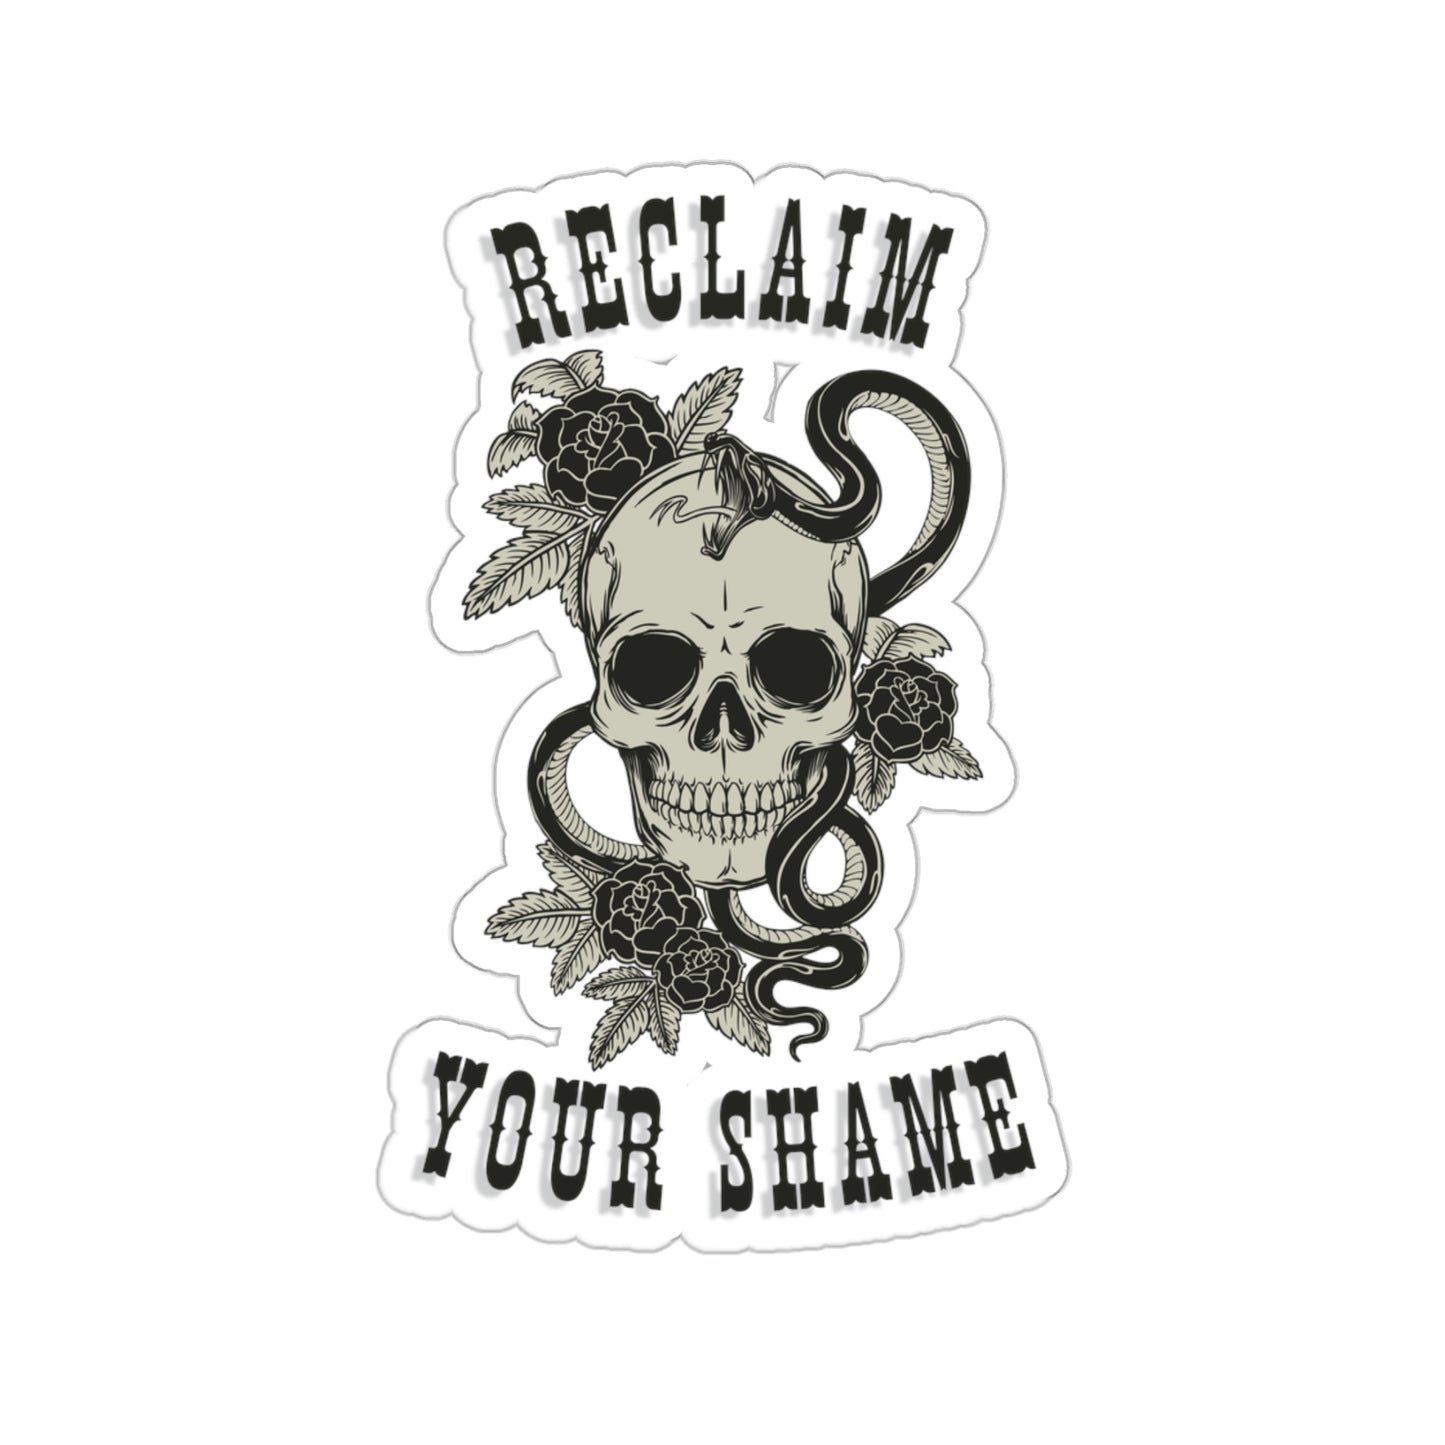 Reclaim Your Shame [Gauthism Line] Kiss-Cut Stickers